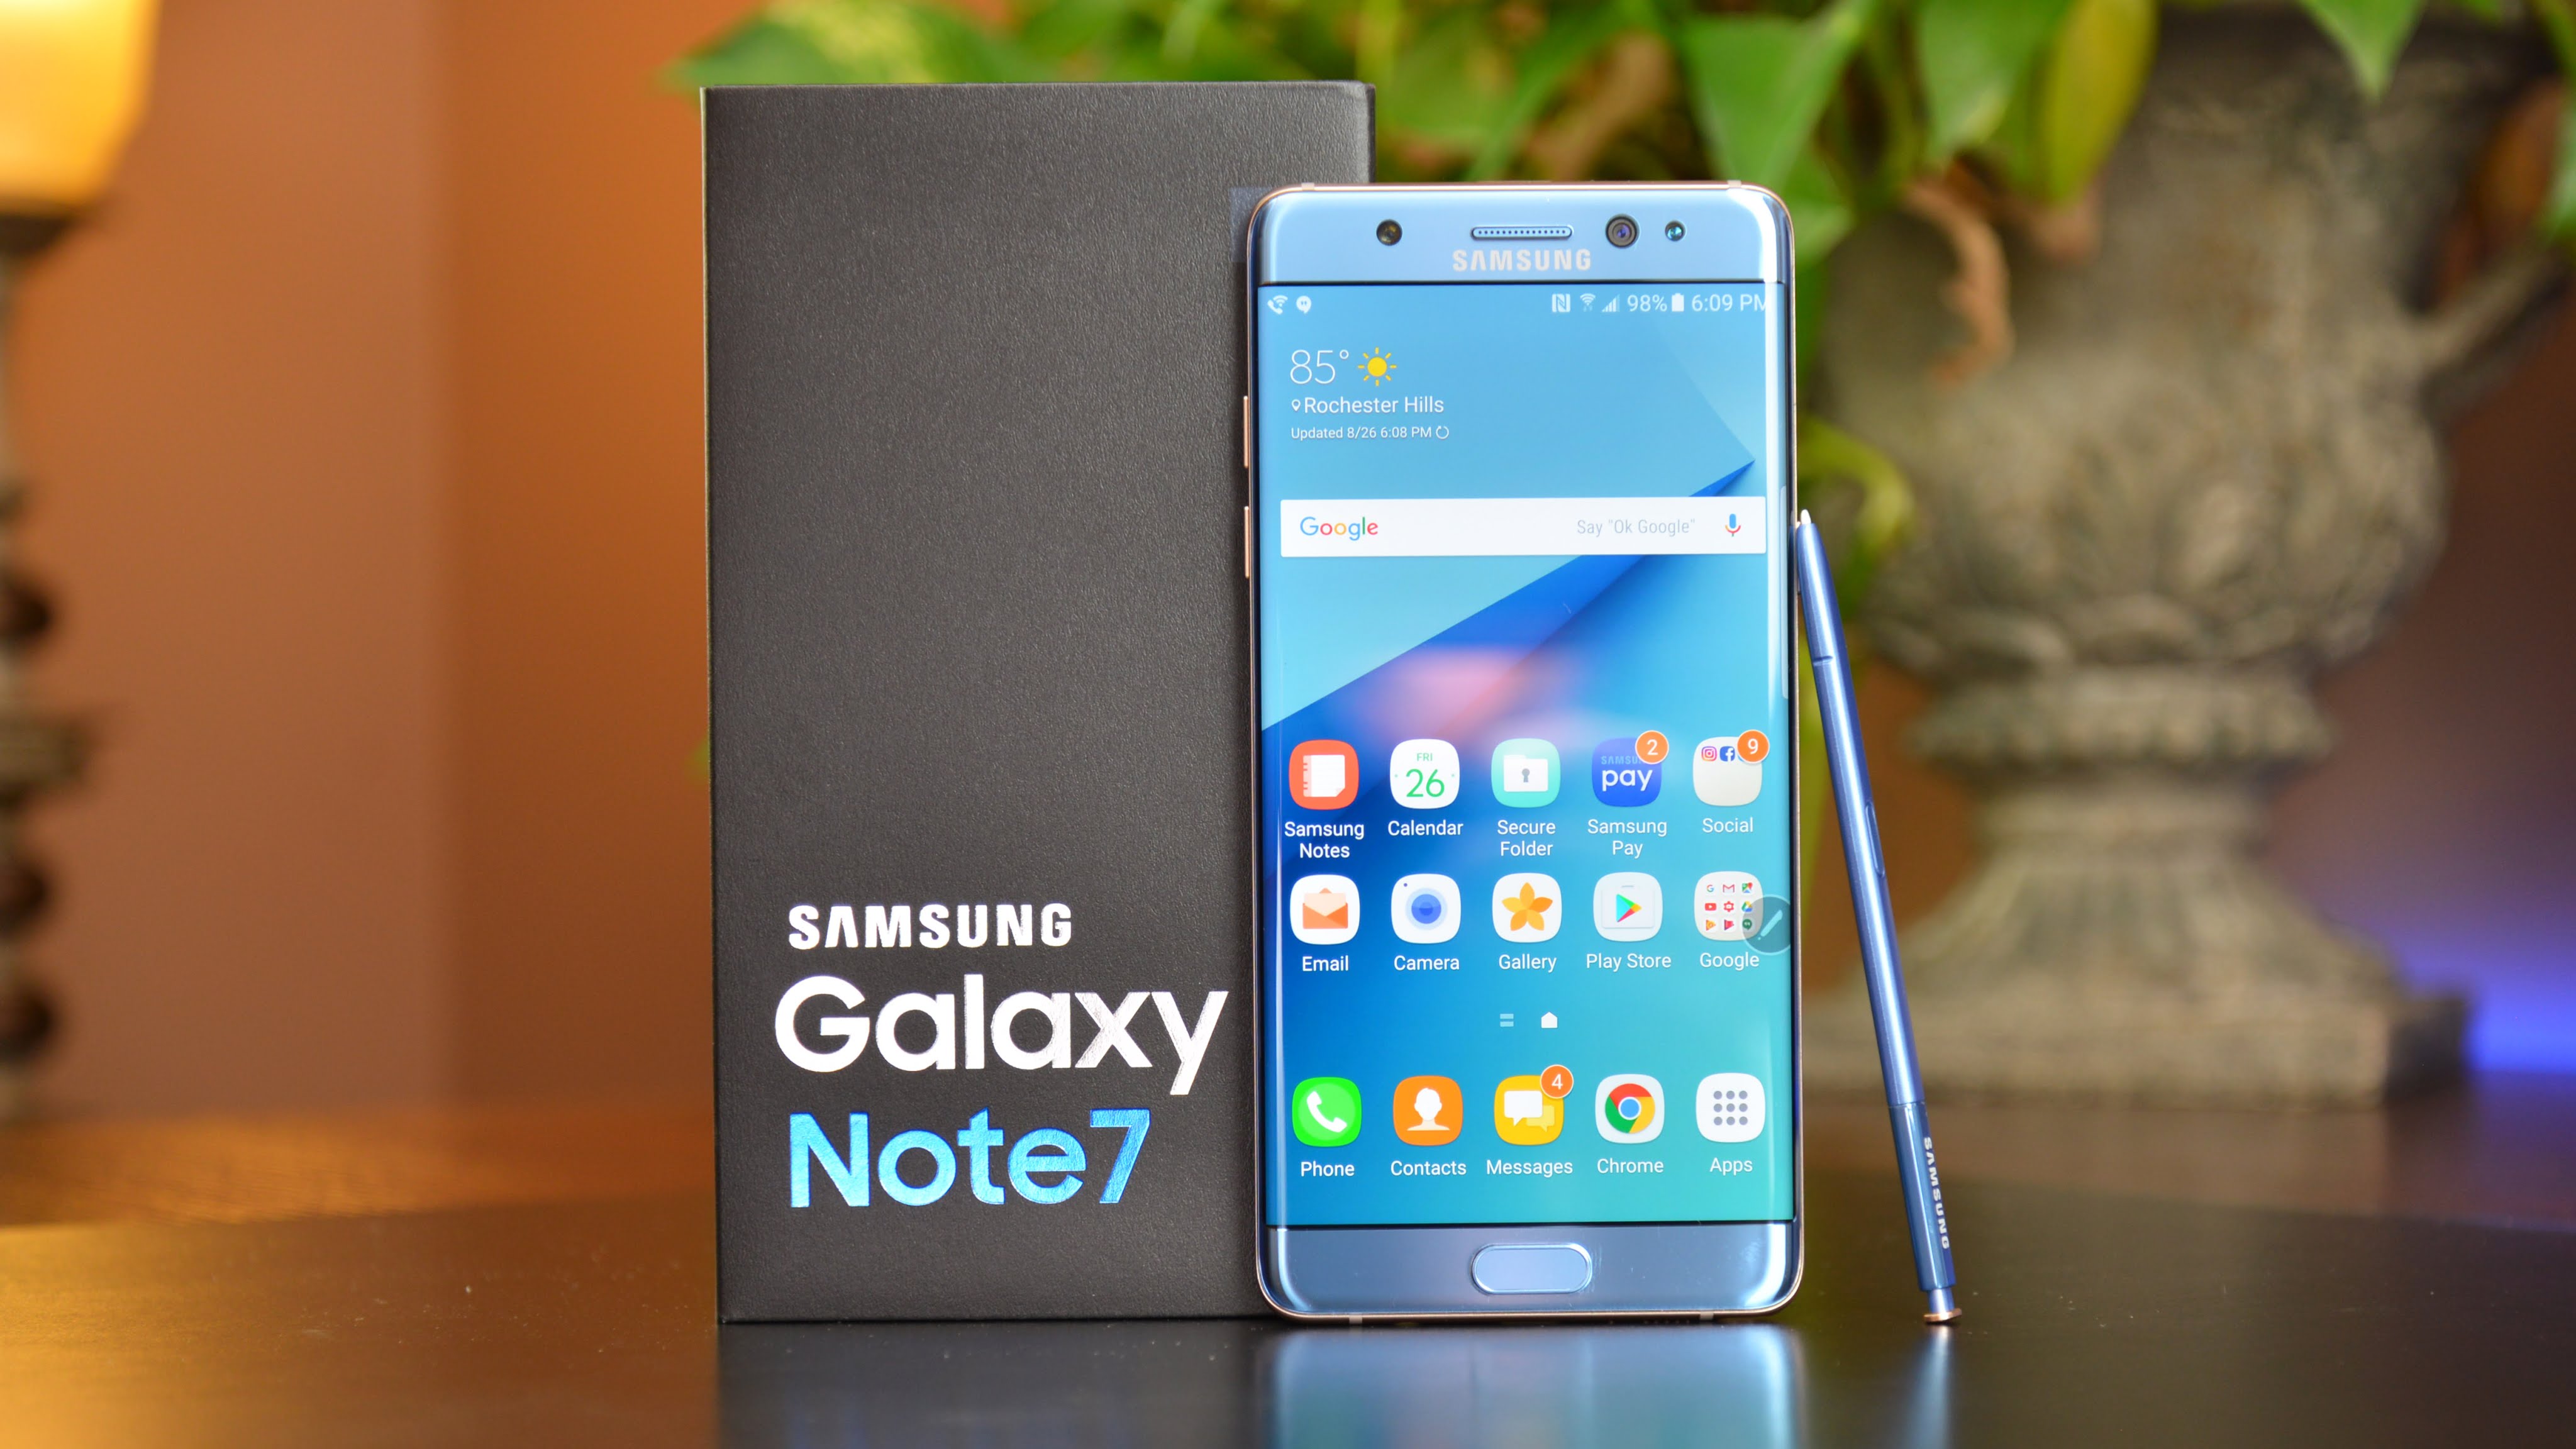 Looks like refurbished Galaxy Note 7 will not be sold after all, at least not in India